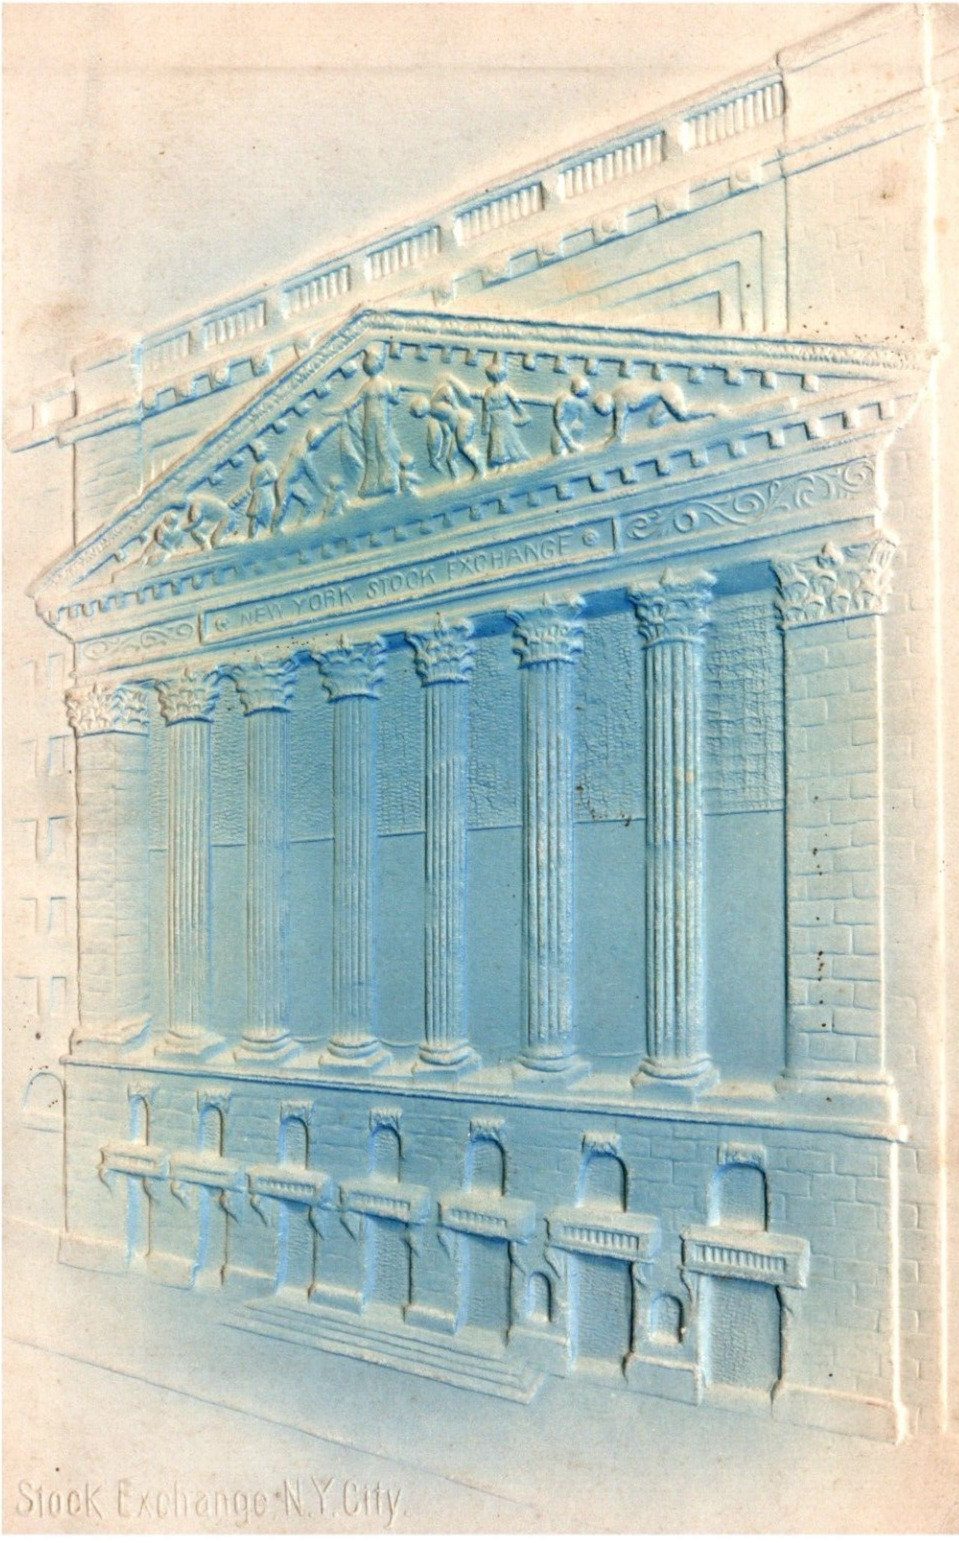 NYSE Stock Exchange Antique Embossed Airbrushed NYC Manhattan Postcard Blue